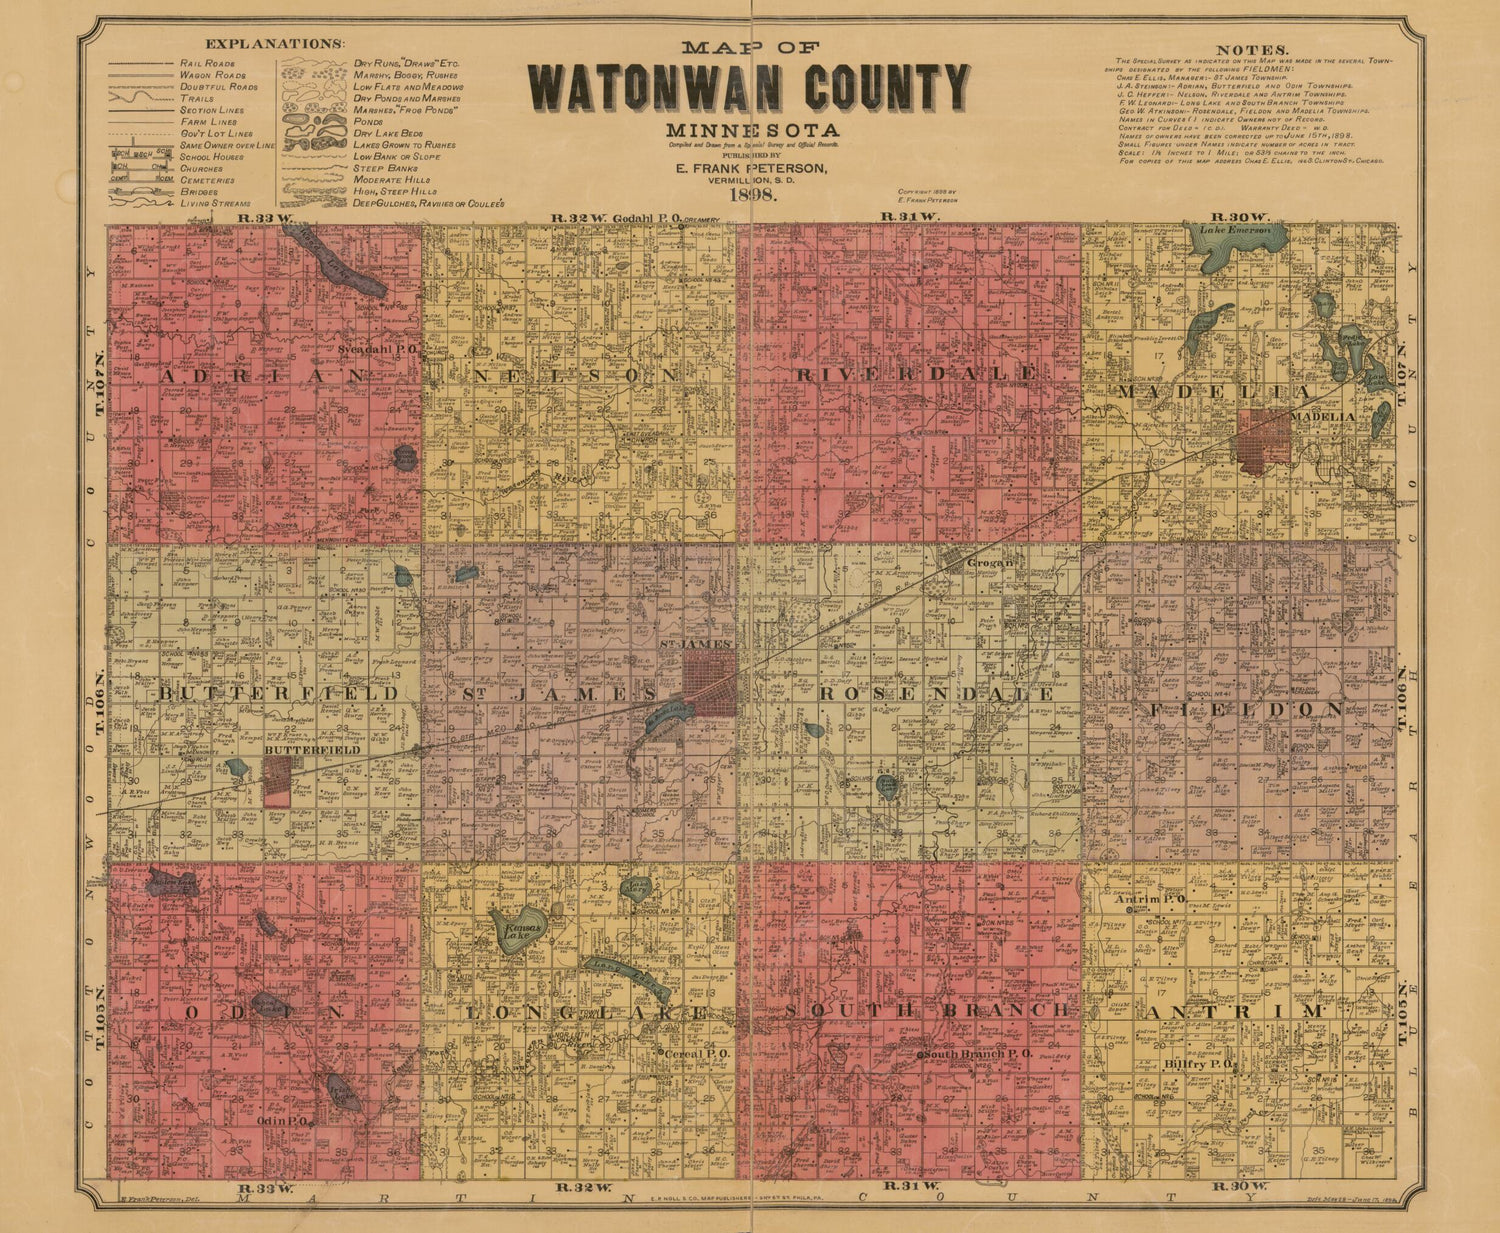 This old map of Map of Watonwan County, Minnesota : Compiled and Drawn from a Special Survey and Official Records from 1898 was created by  E.P. Noll &amp; Co, E. Frank Peterson in 1898